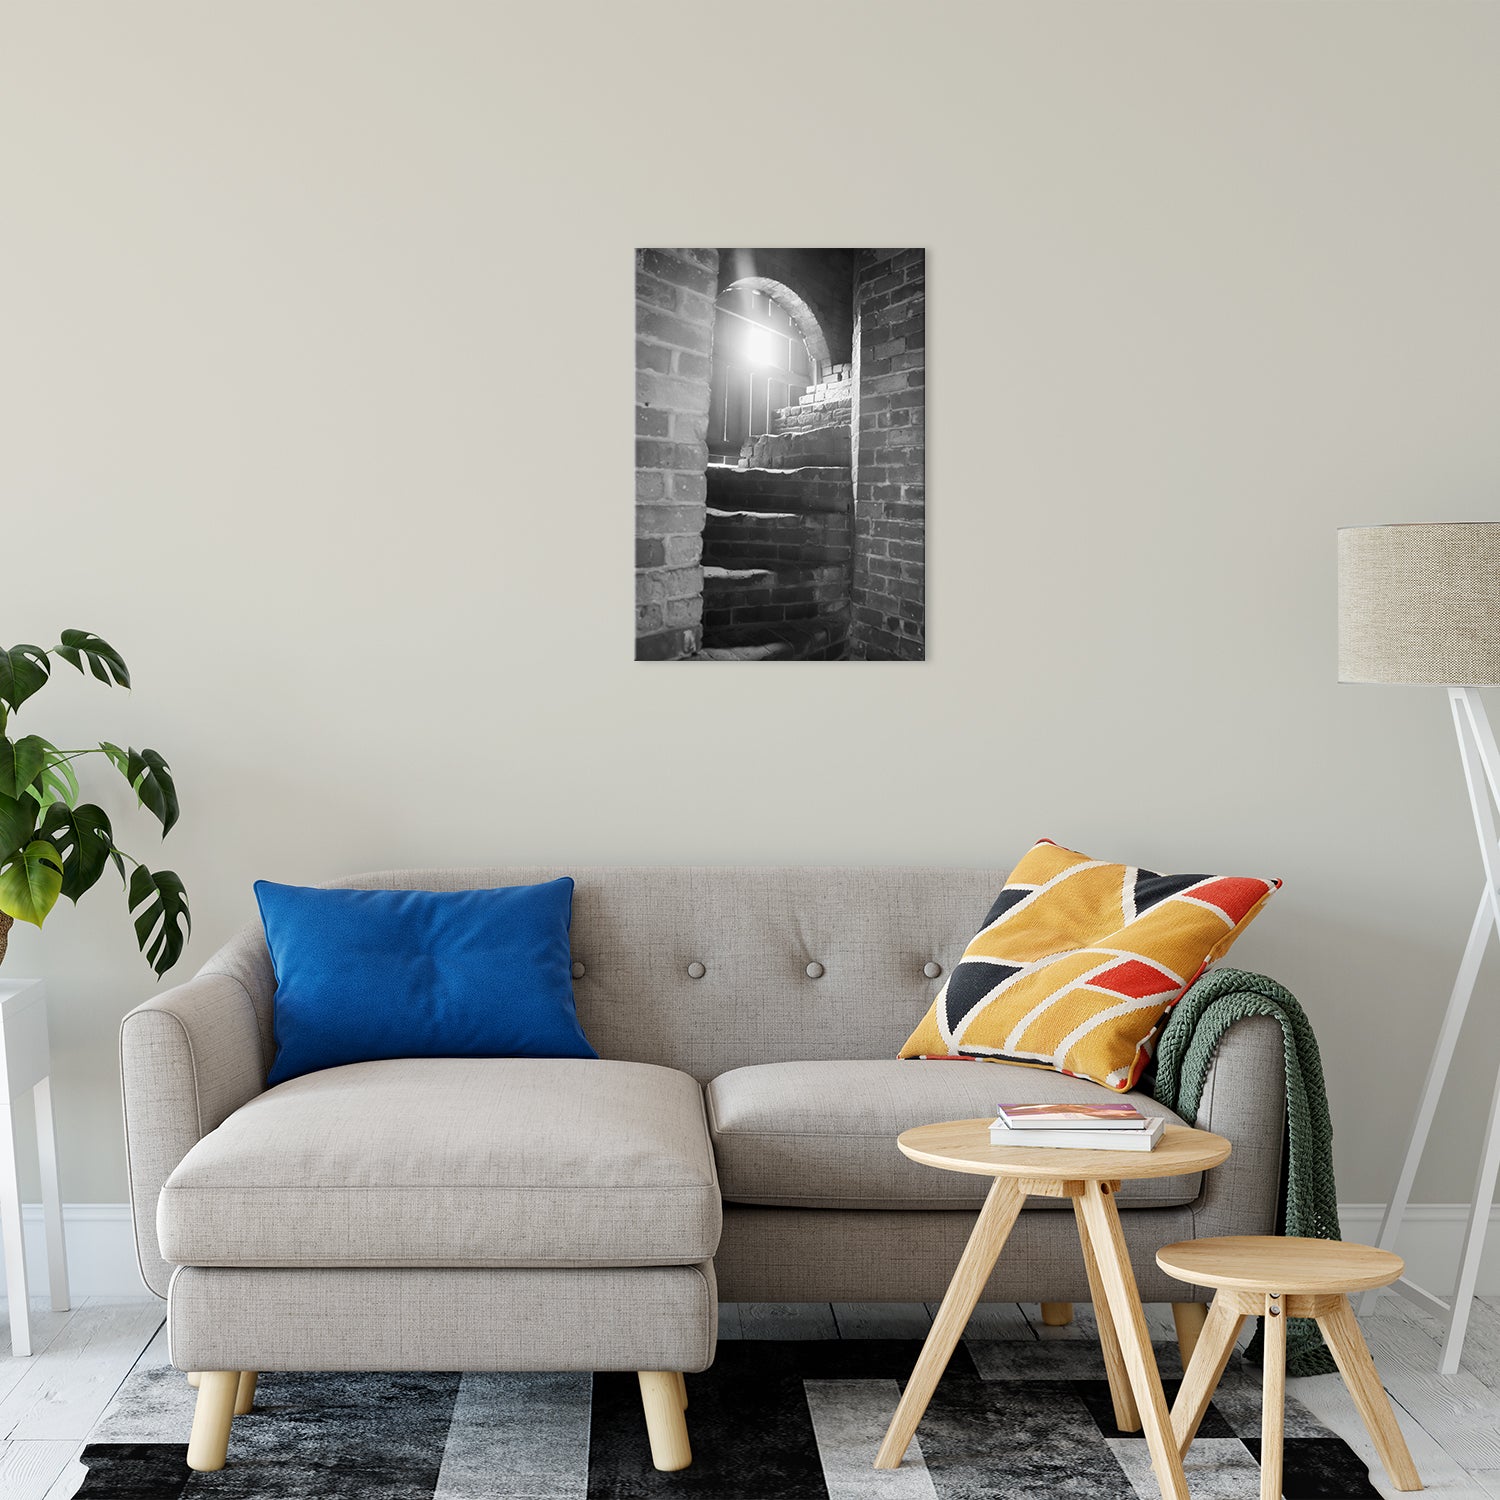 Industrial Wall Art Amazon: Fort Clinch Stairway Black and White Architecture Photo Fine Art Canvas Wall Art Print